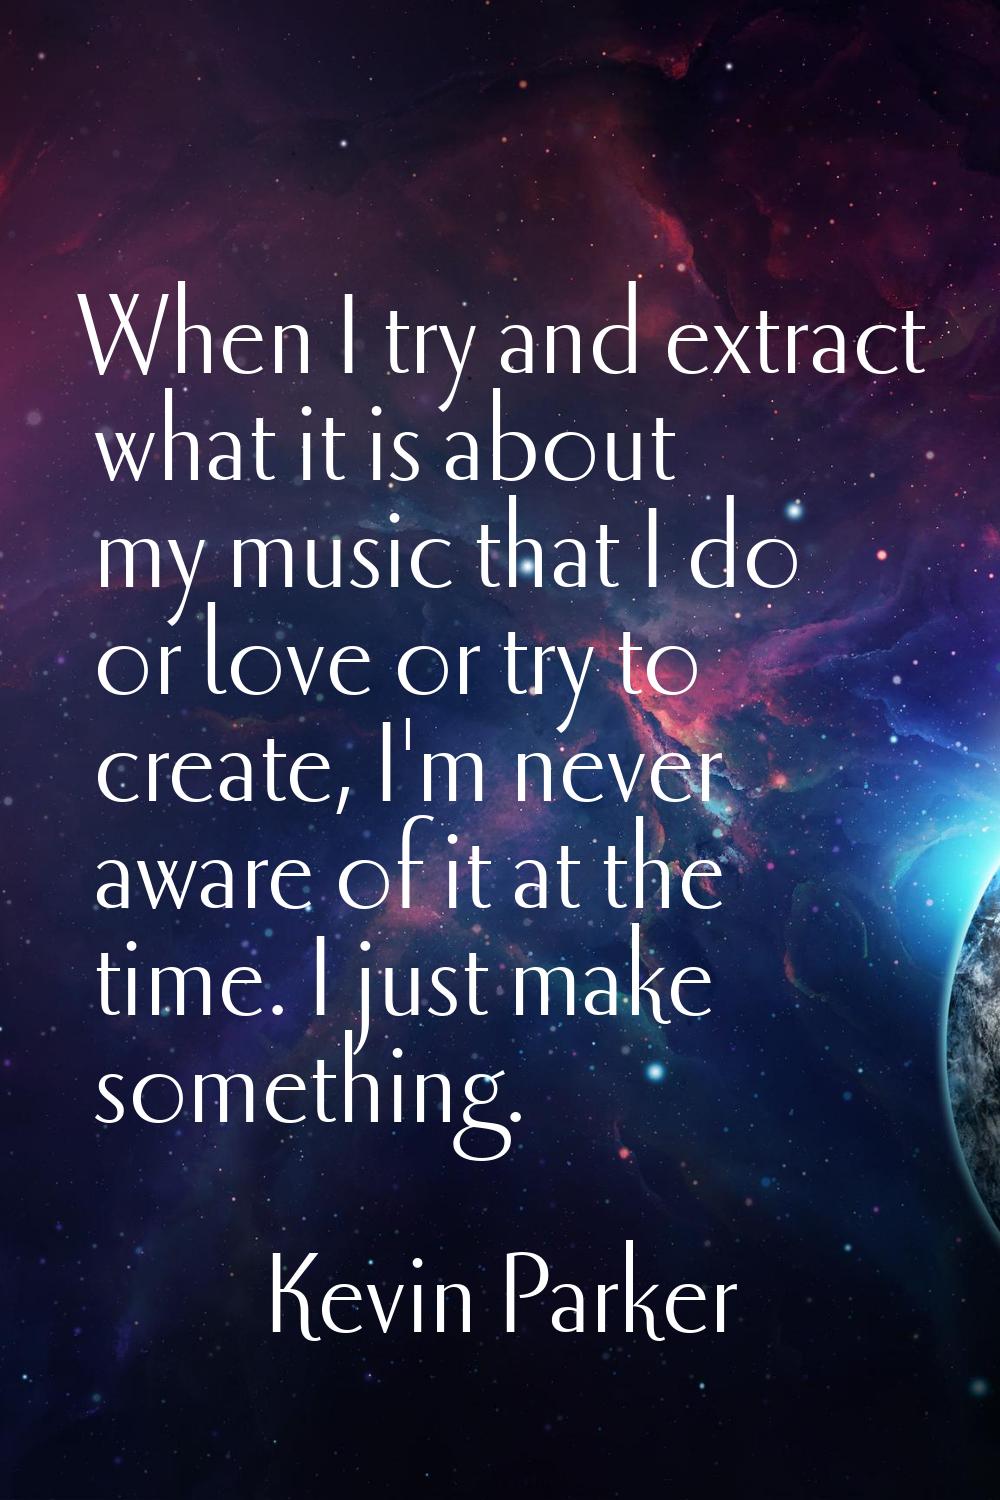 When I try and extract what it is about my music that I do or love or try to create, I'm never awar